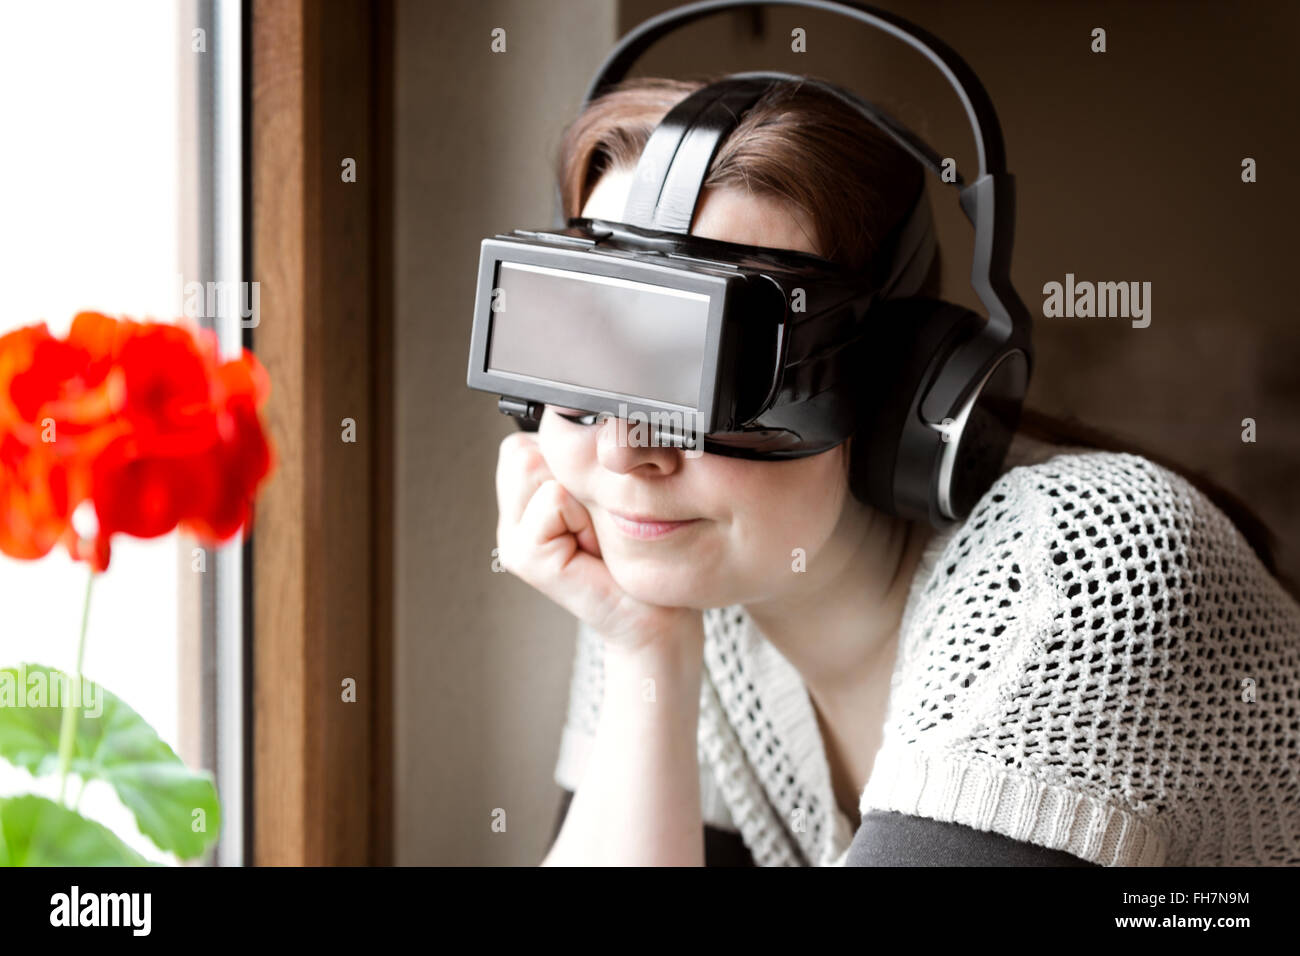 woman is wearing vr glasses, leaning at a window Stock Photo